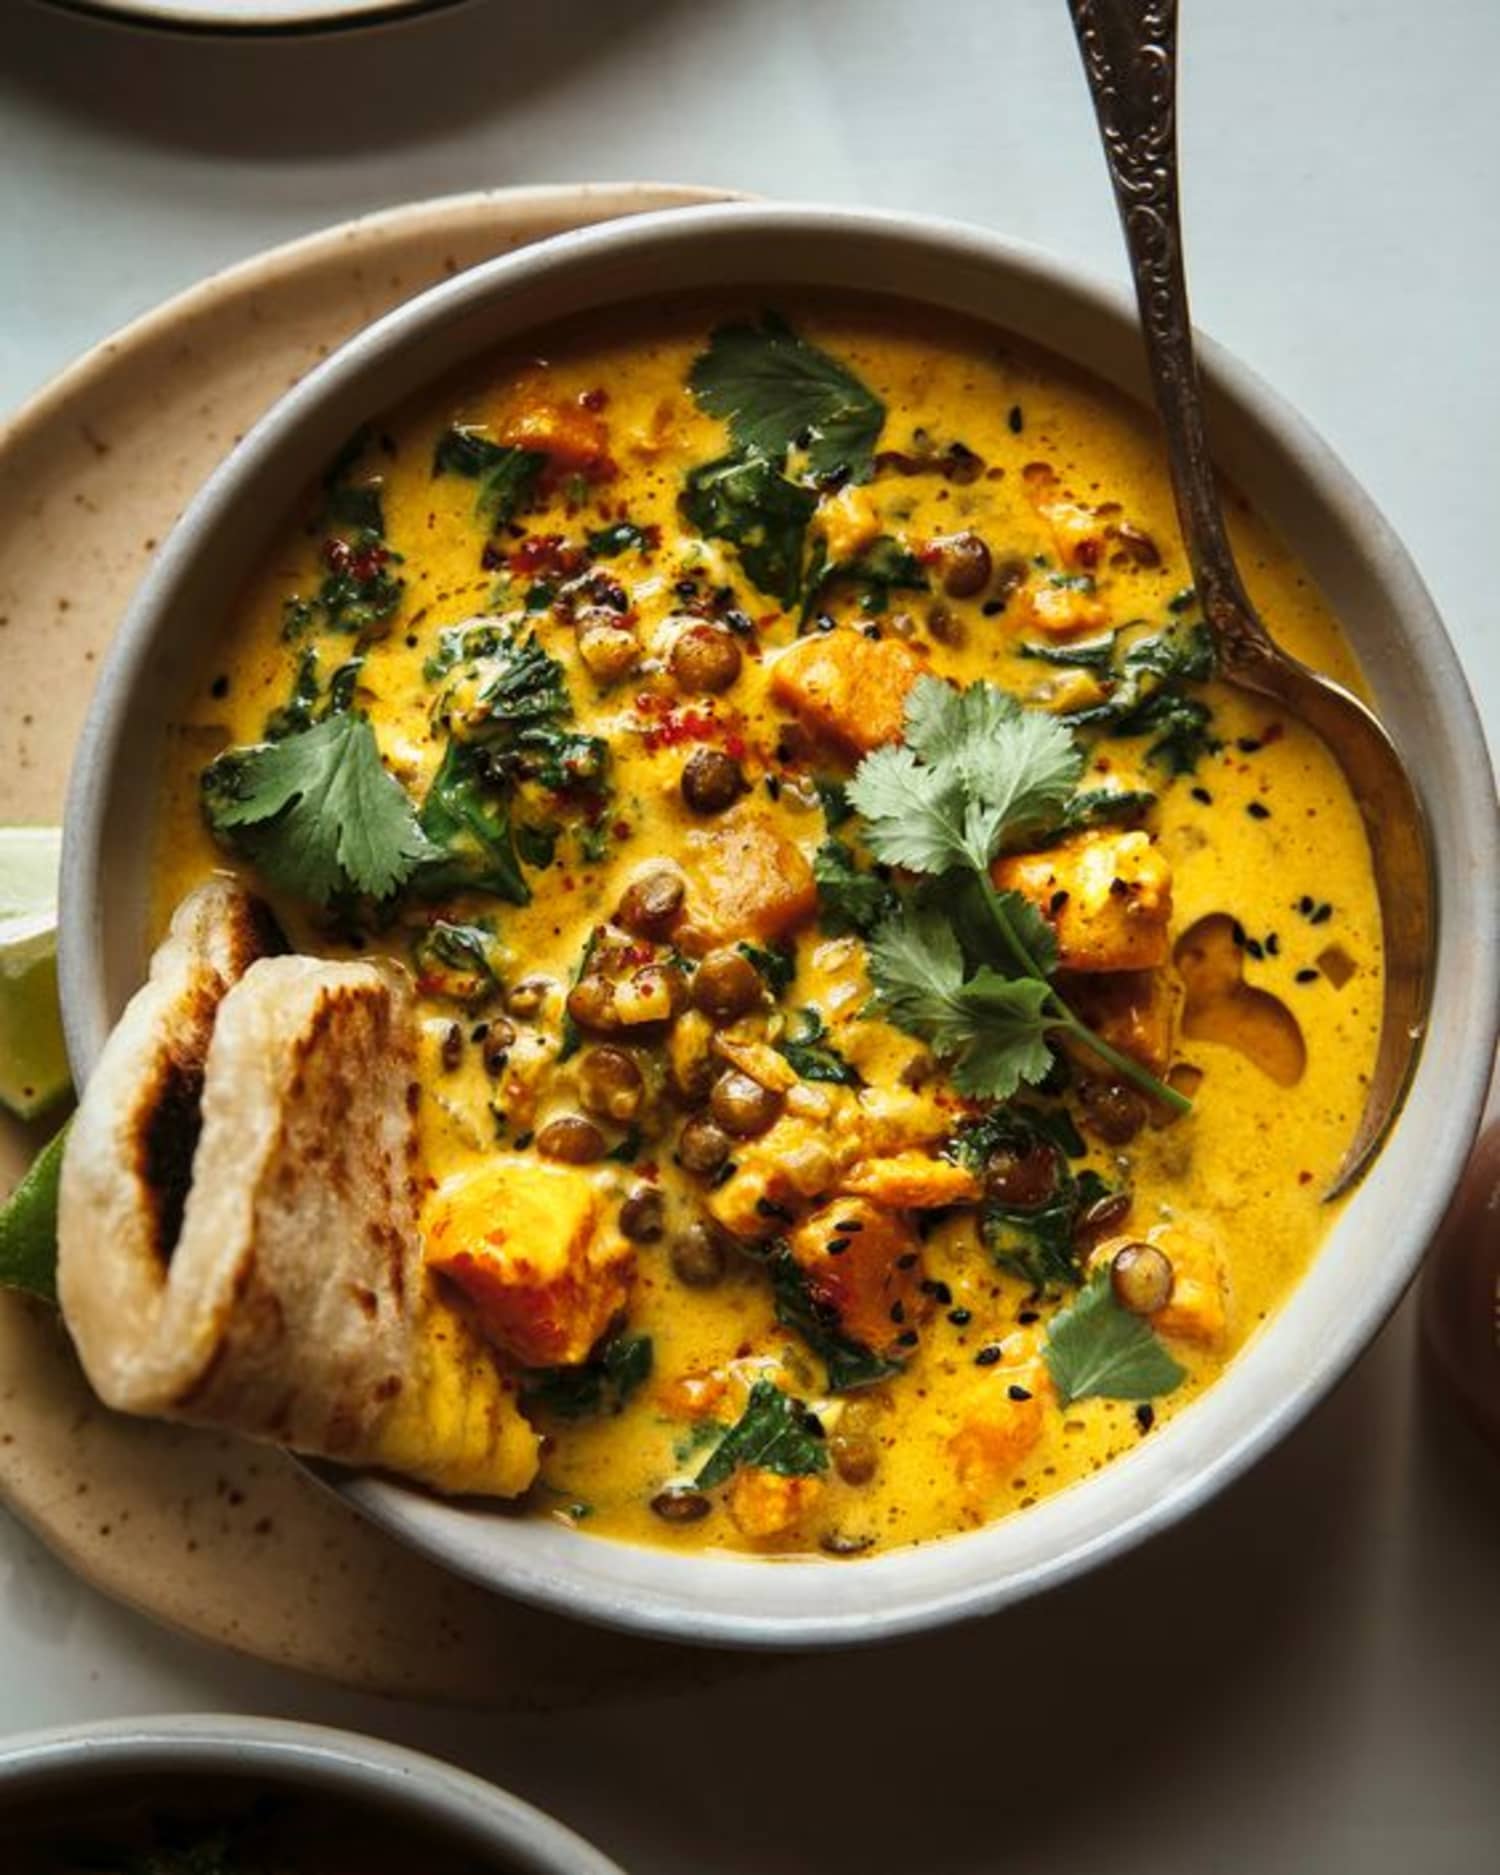 Sweet Potato Coconut Milk Stew Is Exactly What I Want Right Now